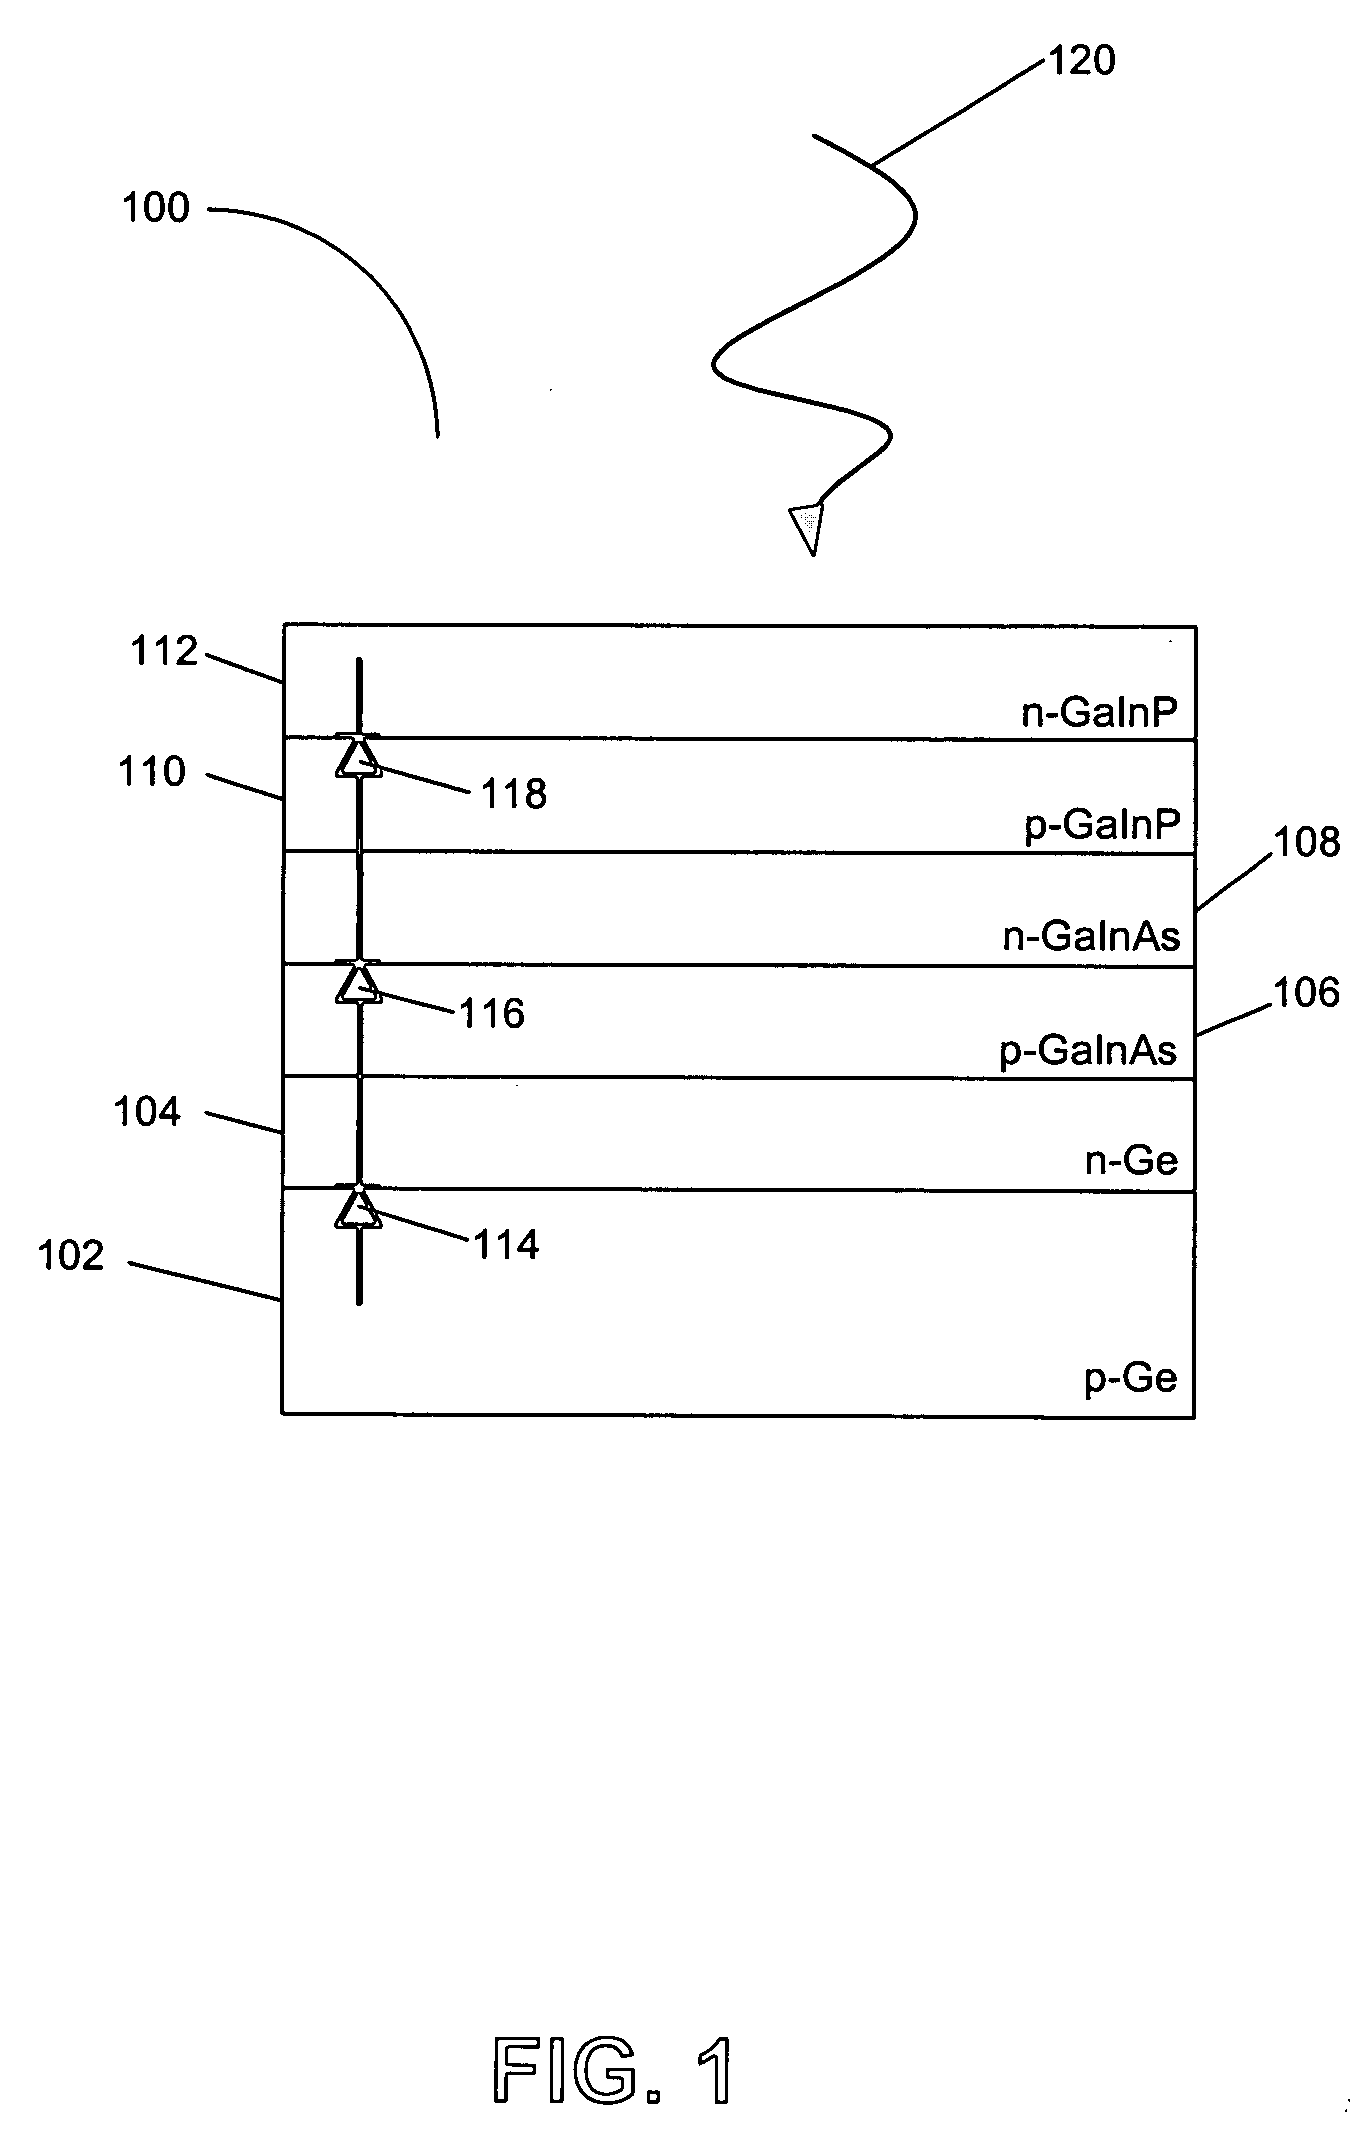 Multijunction solar cell with bonded transparent conductive interlayer